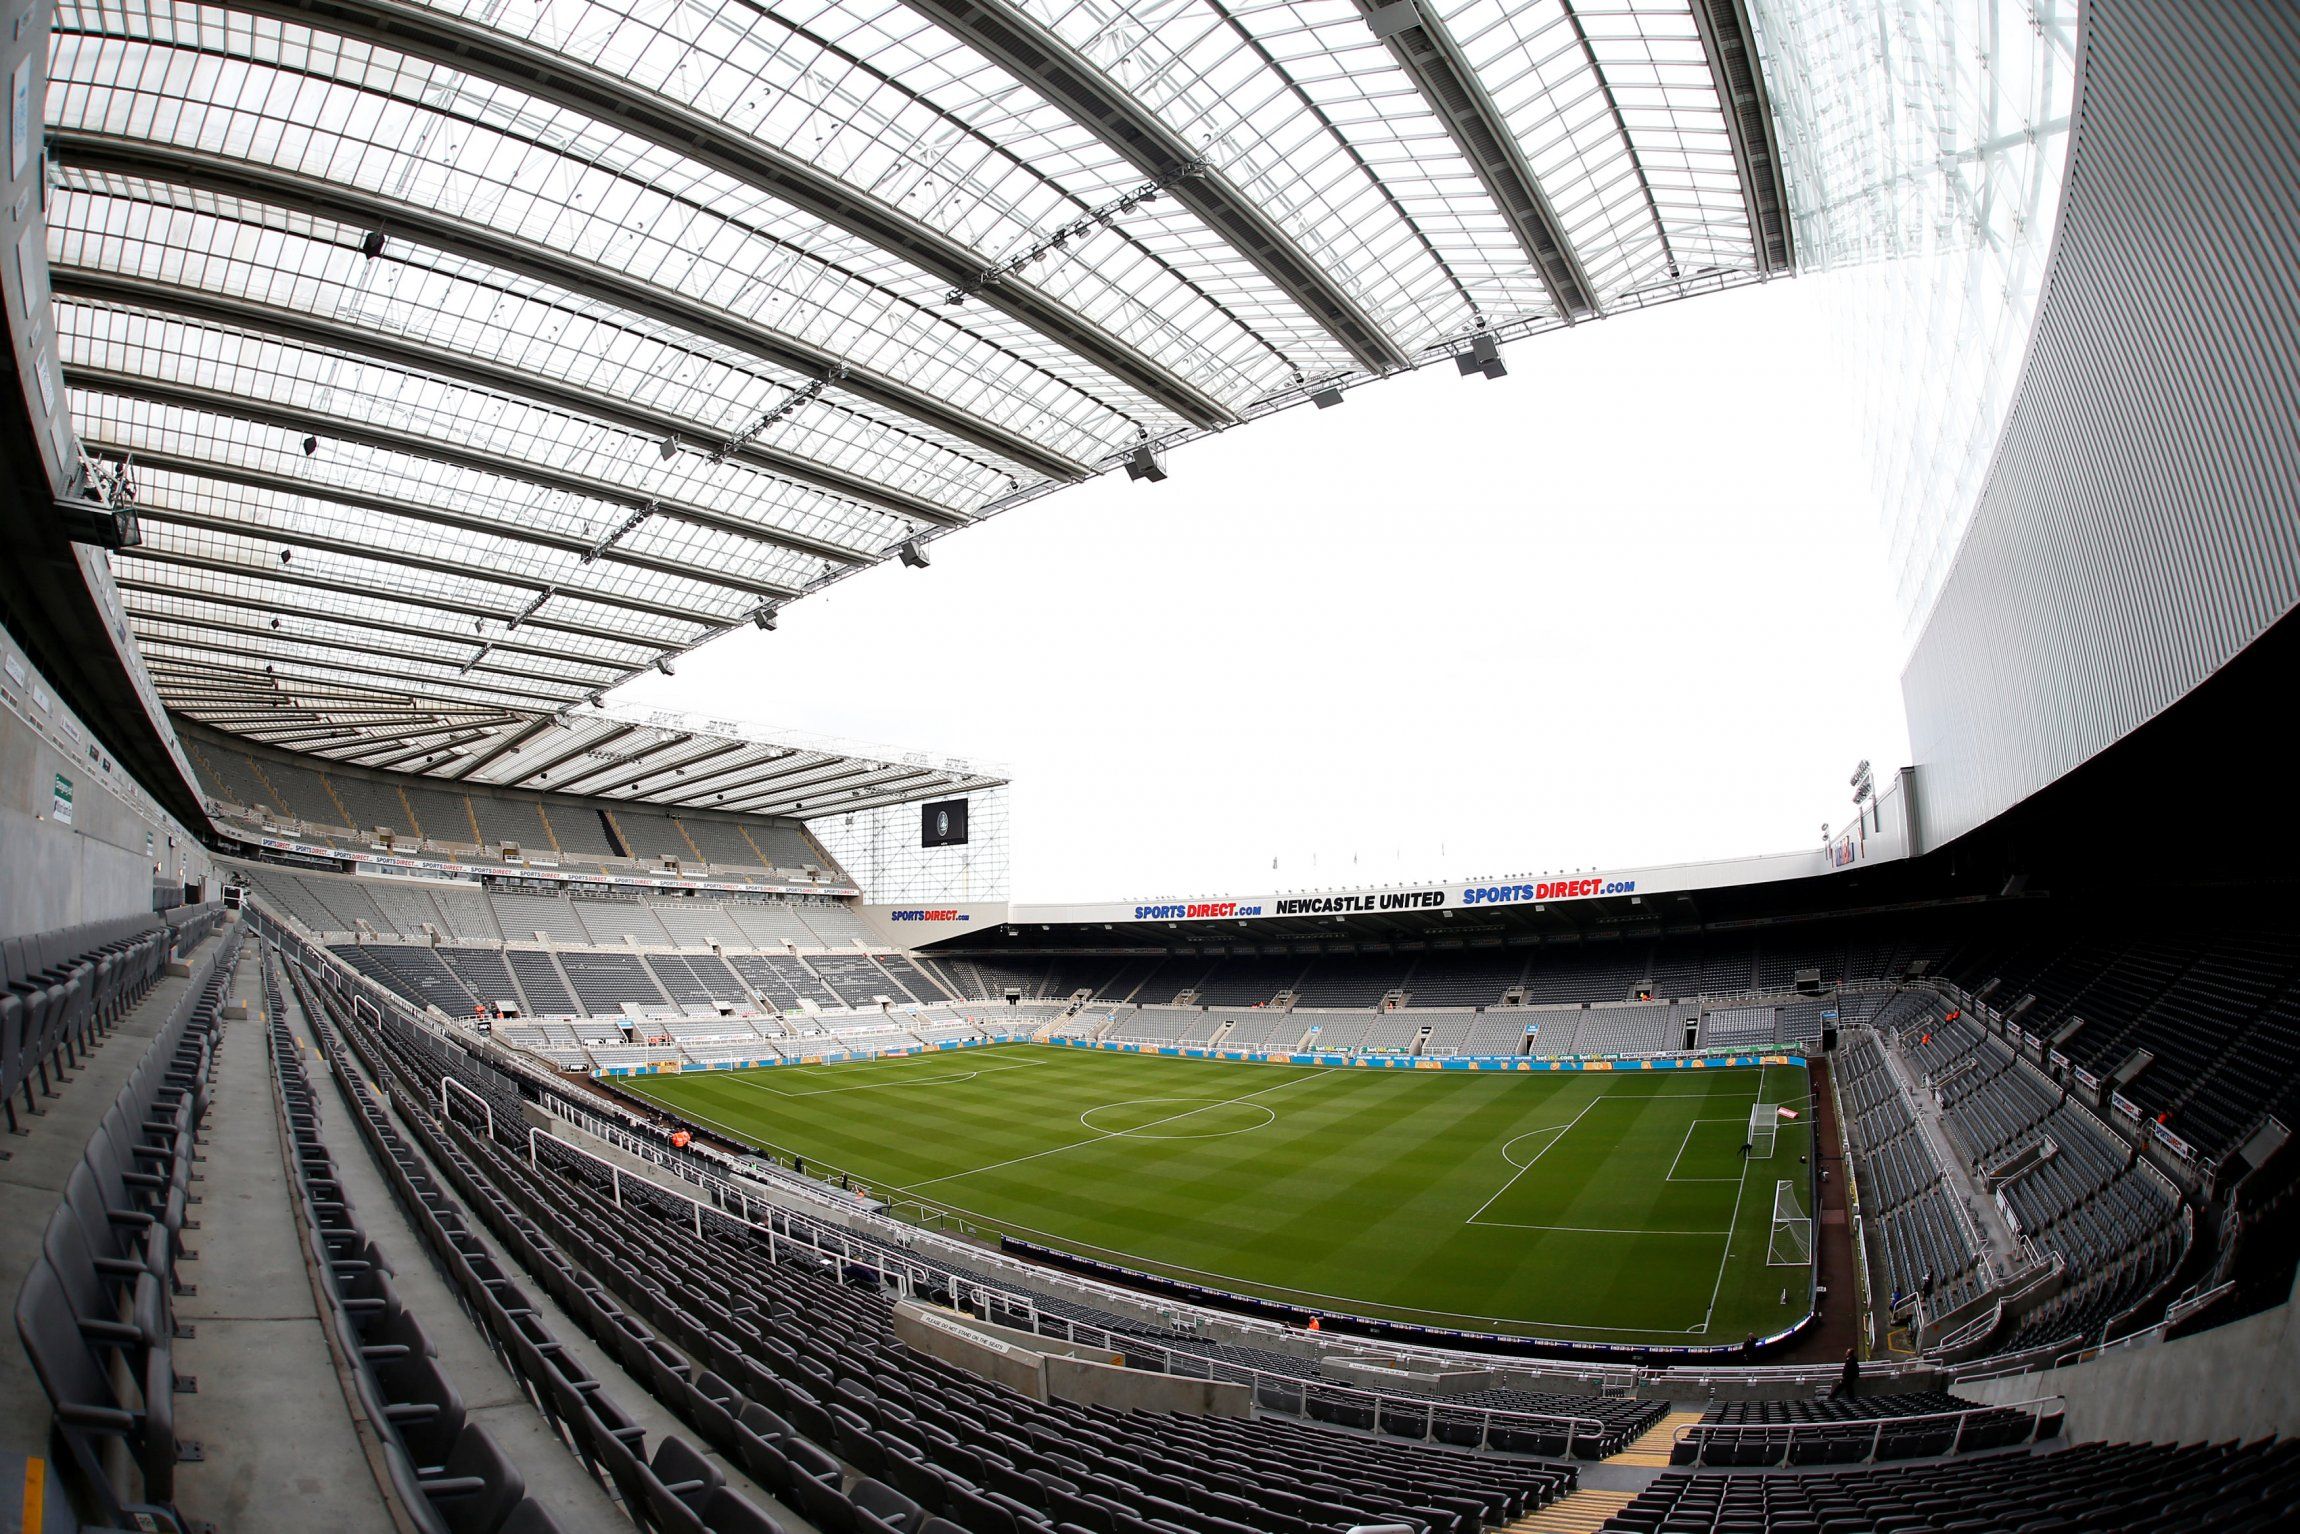 General view inside St James' Park - home of Newcastle United